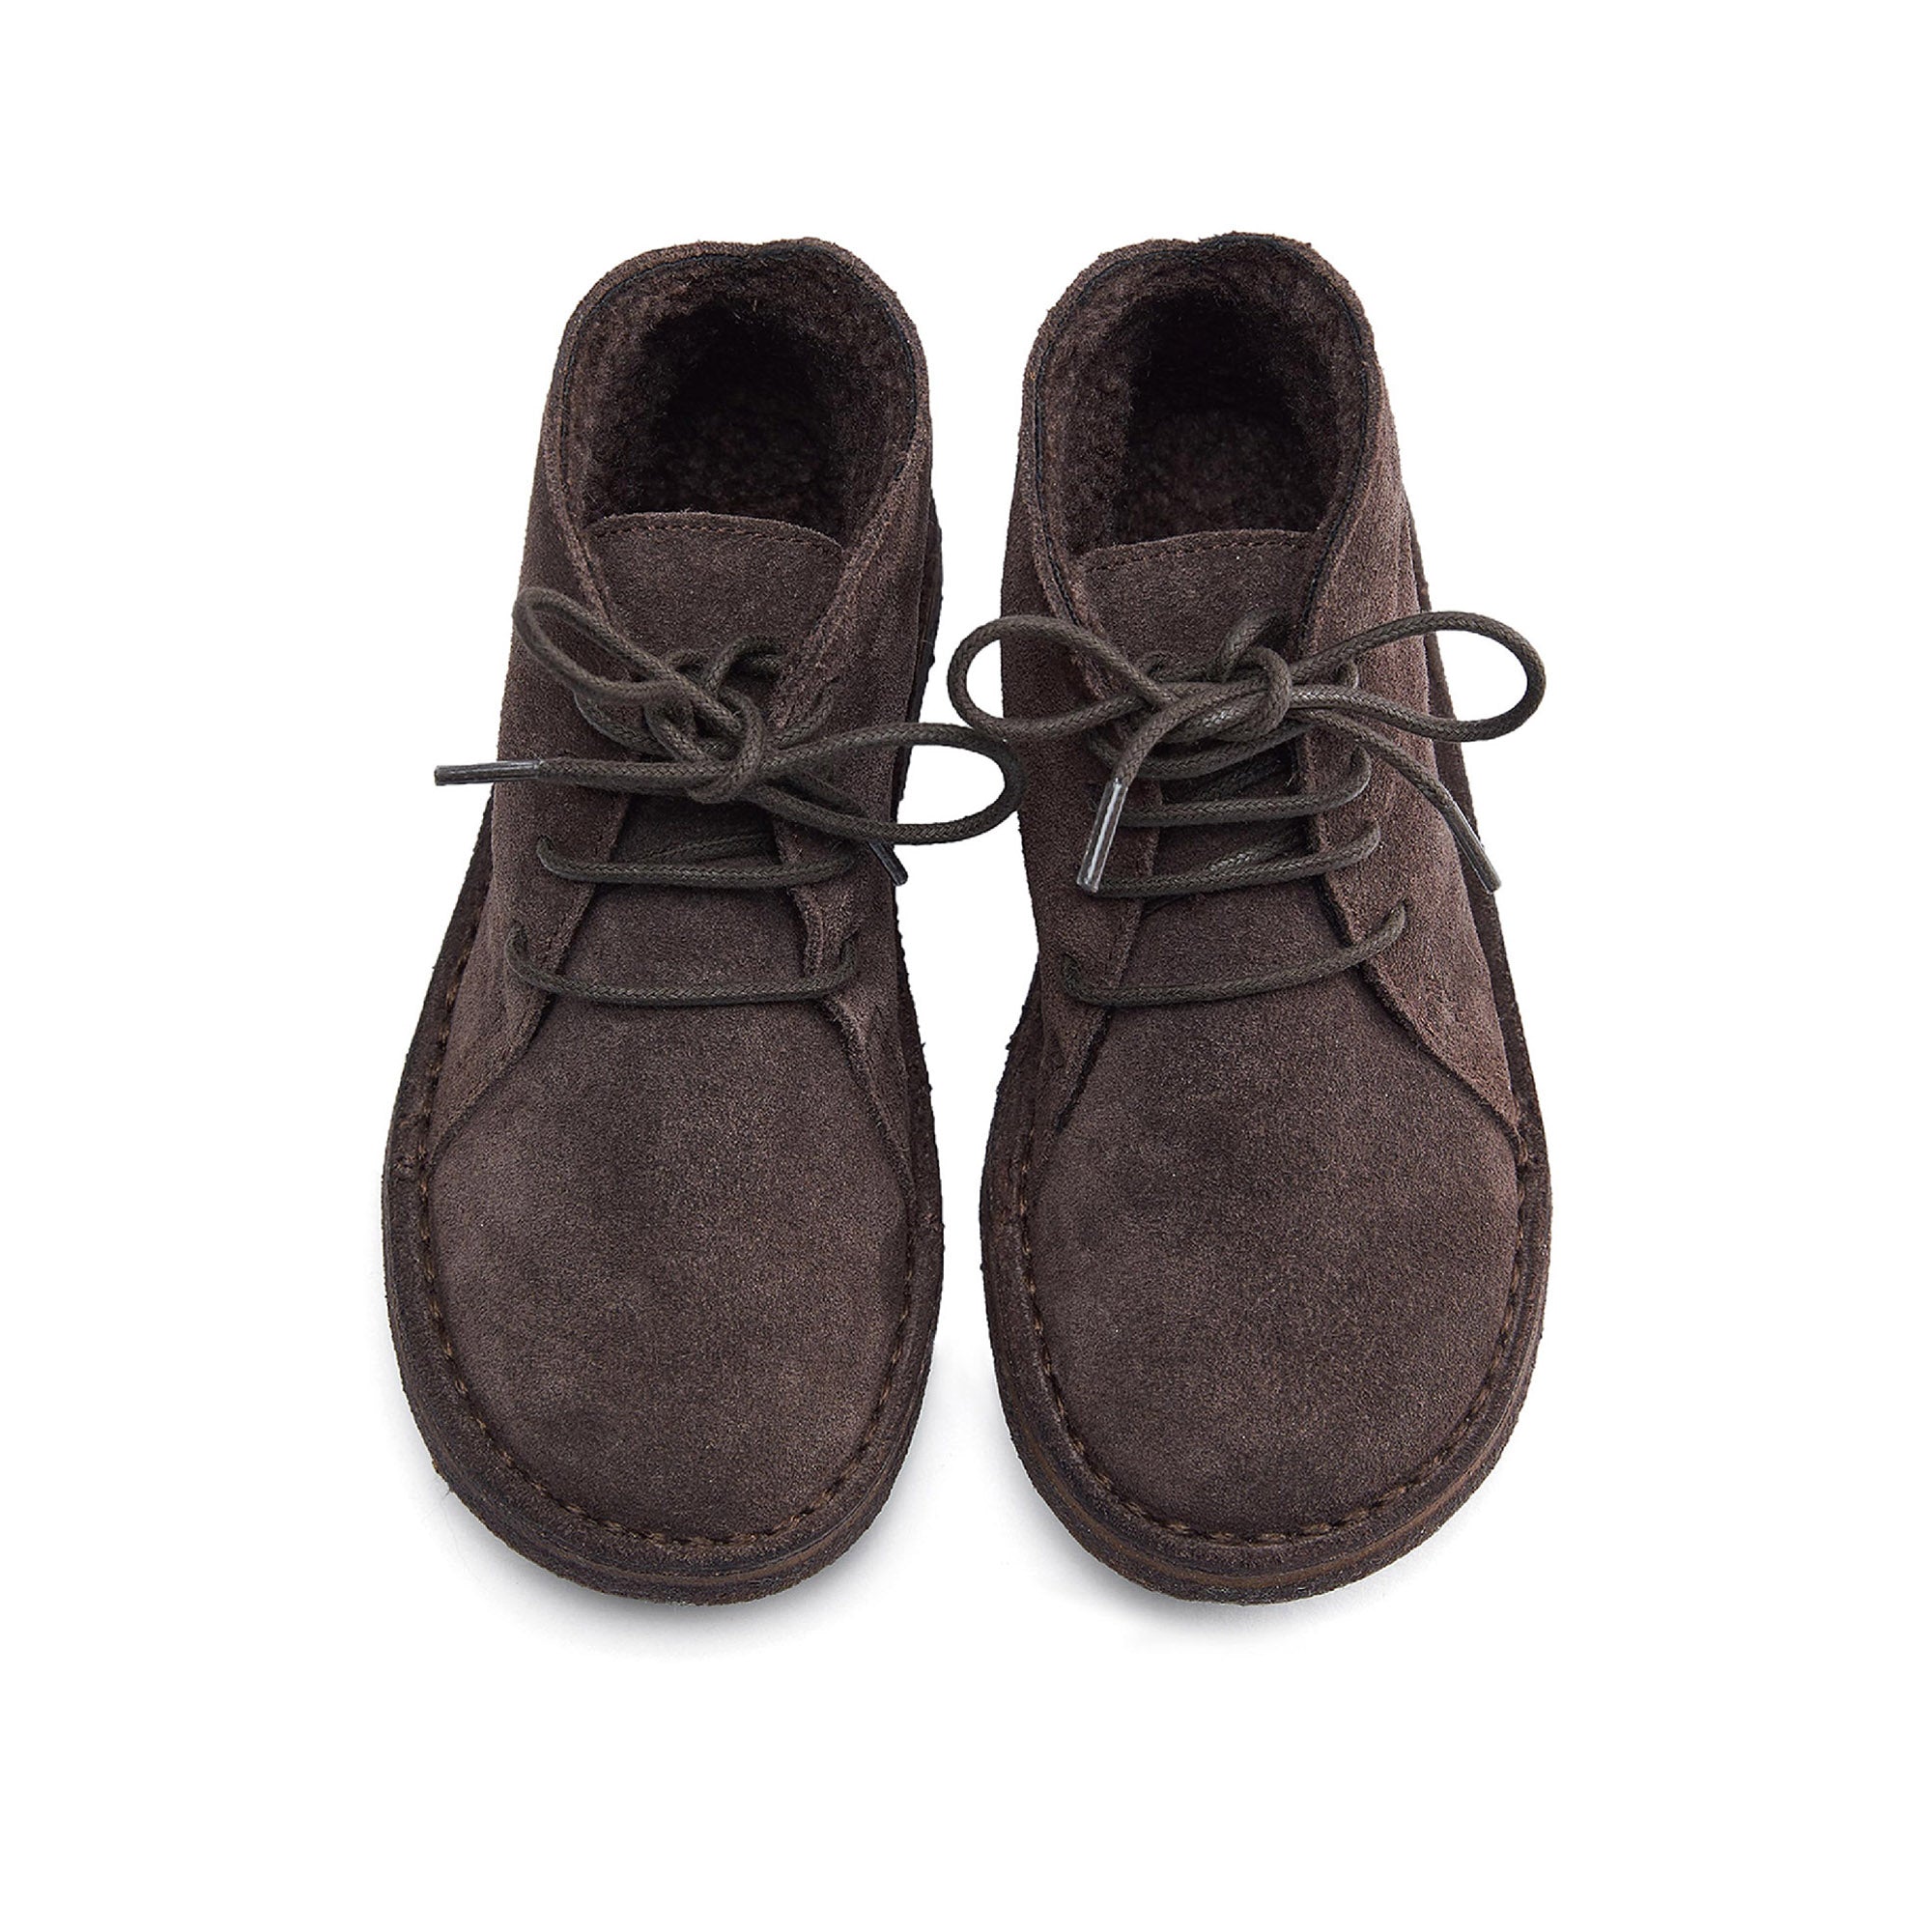 Boys & Girls Dark Brown Leather Shoes